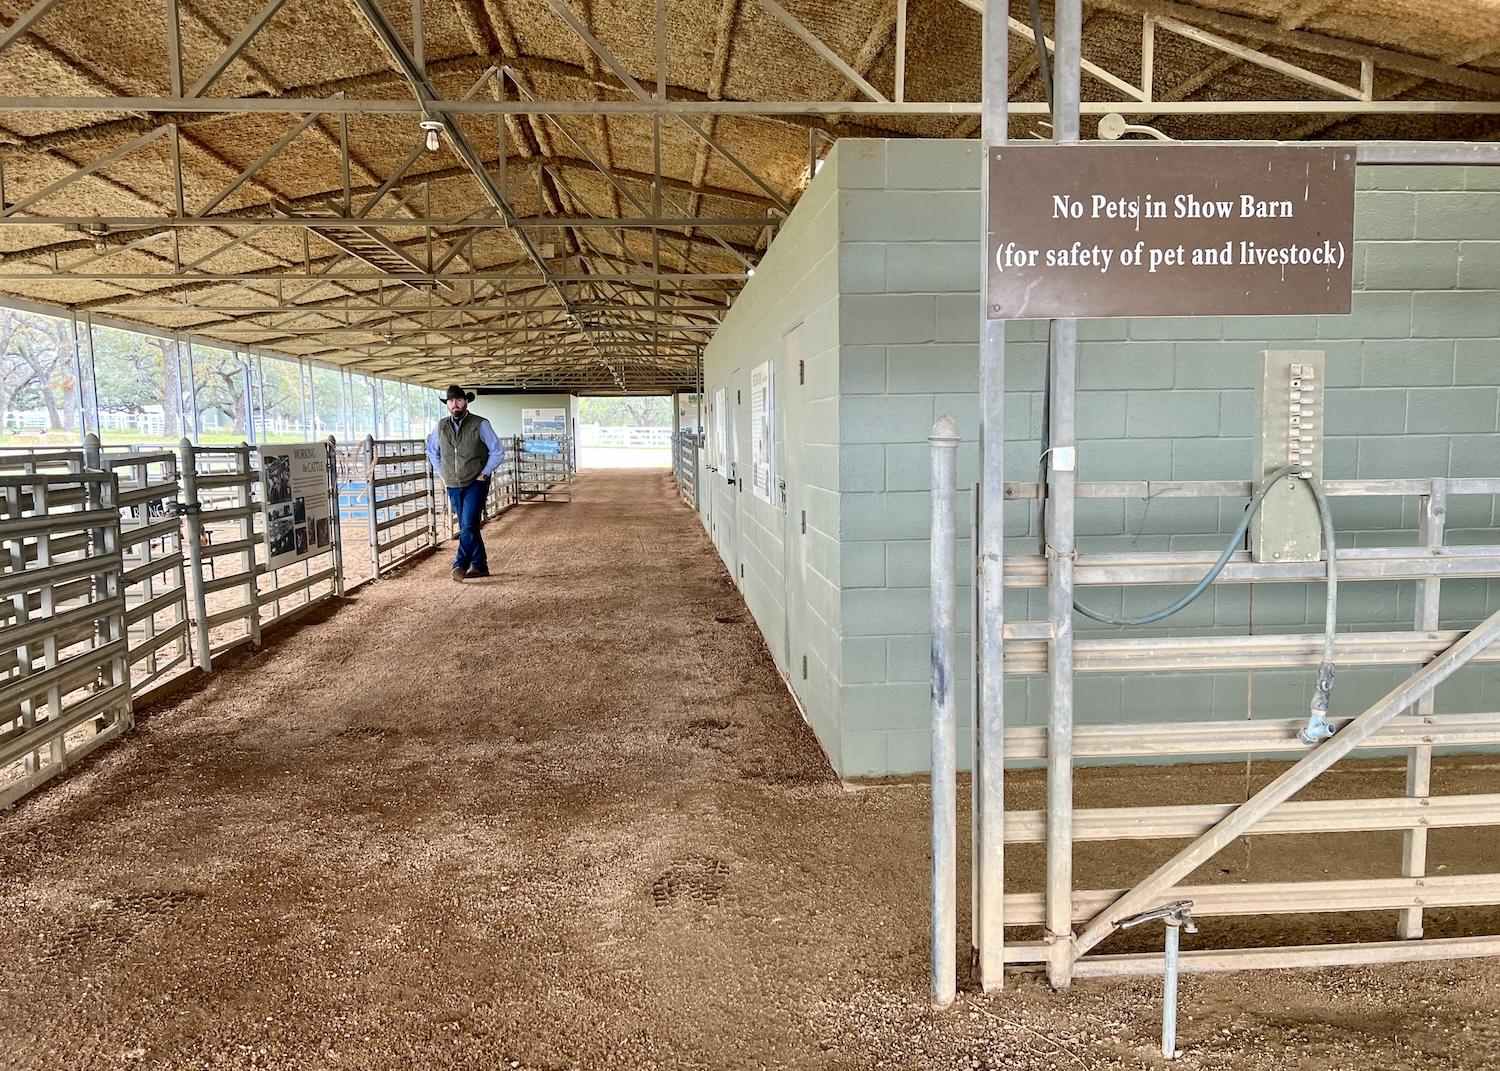 Clint Herriman, LBJ Ranch foreman for the NPS, walks in the Show Barn at Lyndon B. Johnson National Historical Park.